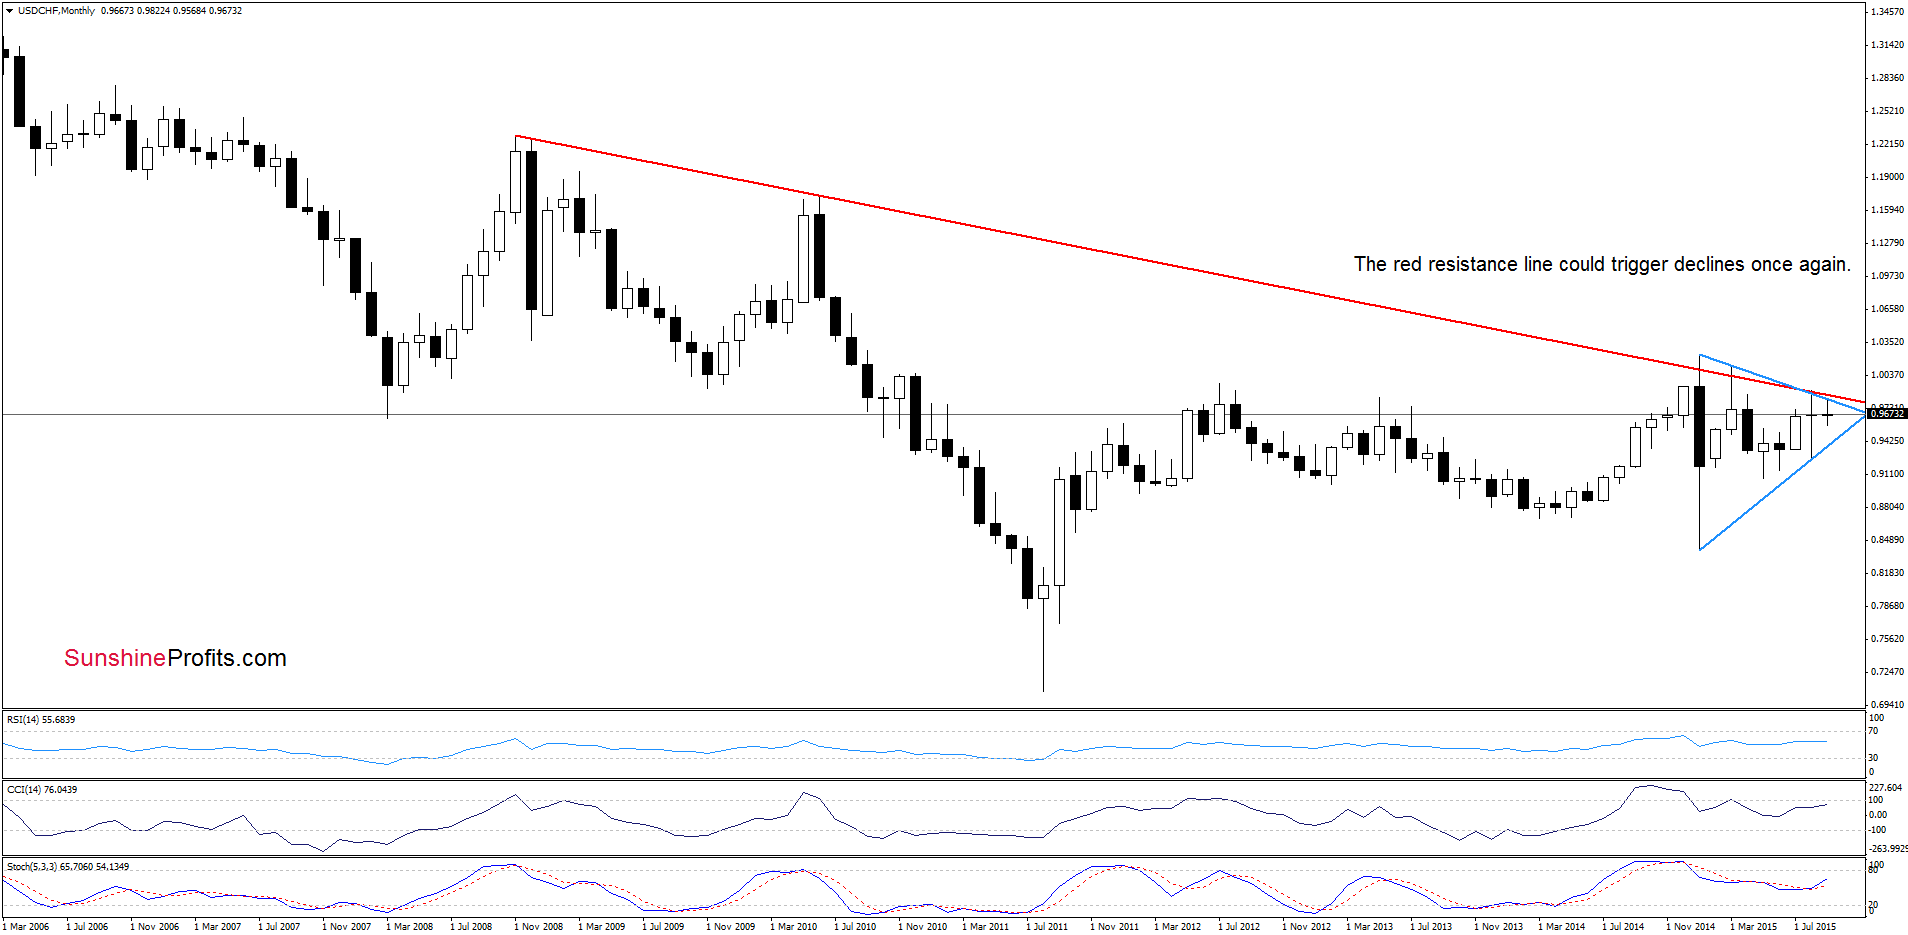 USD/CHF monthly chart